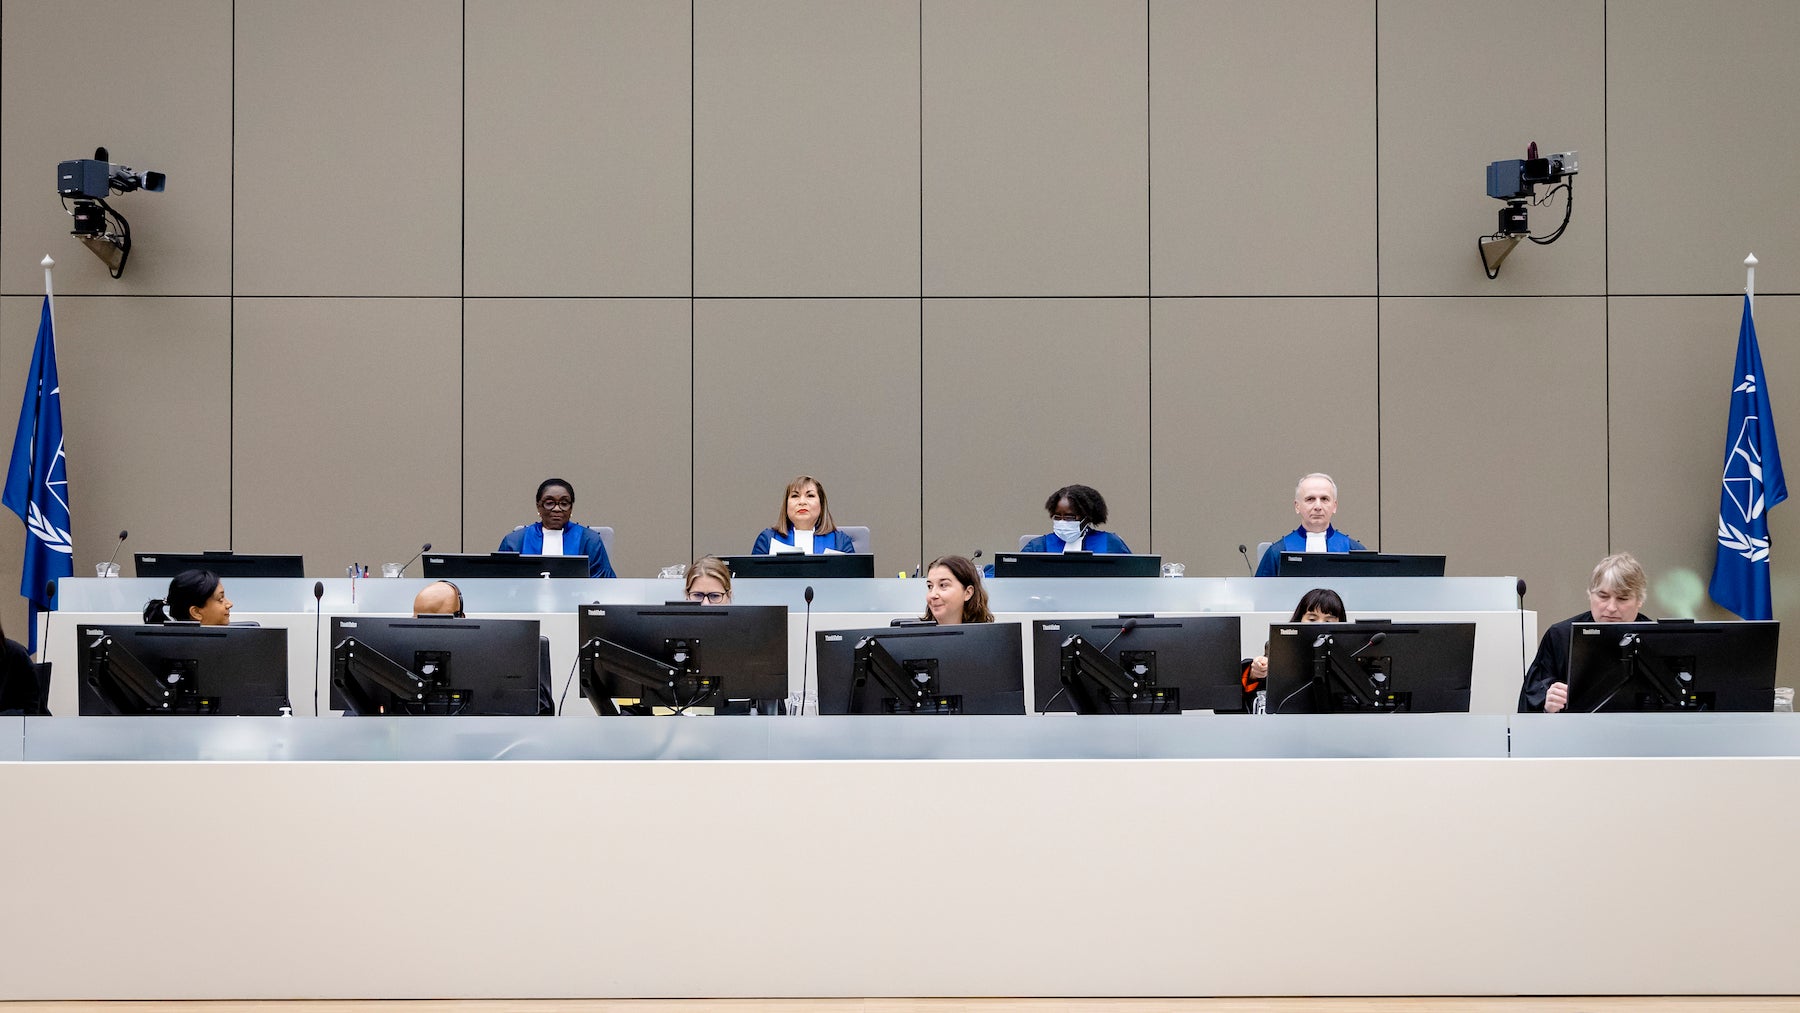 Judges of the Appeals Chamber of the International Criminal Court in The Hague, Netherlands.